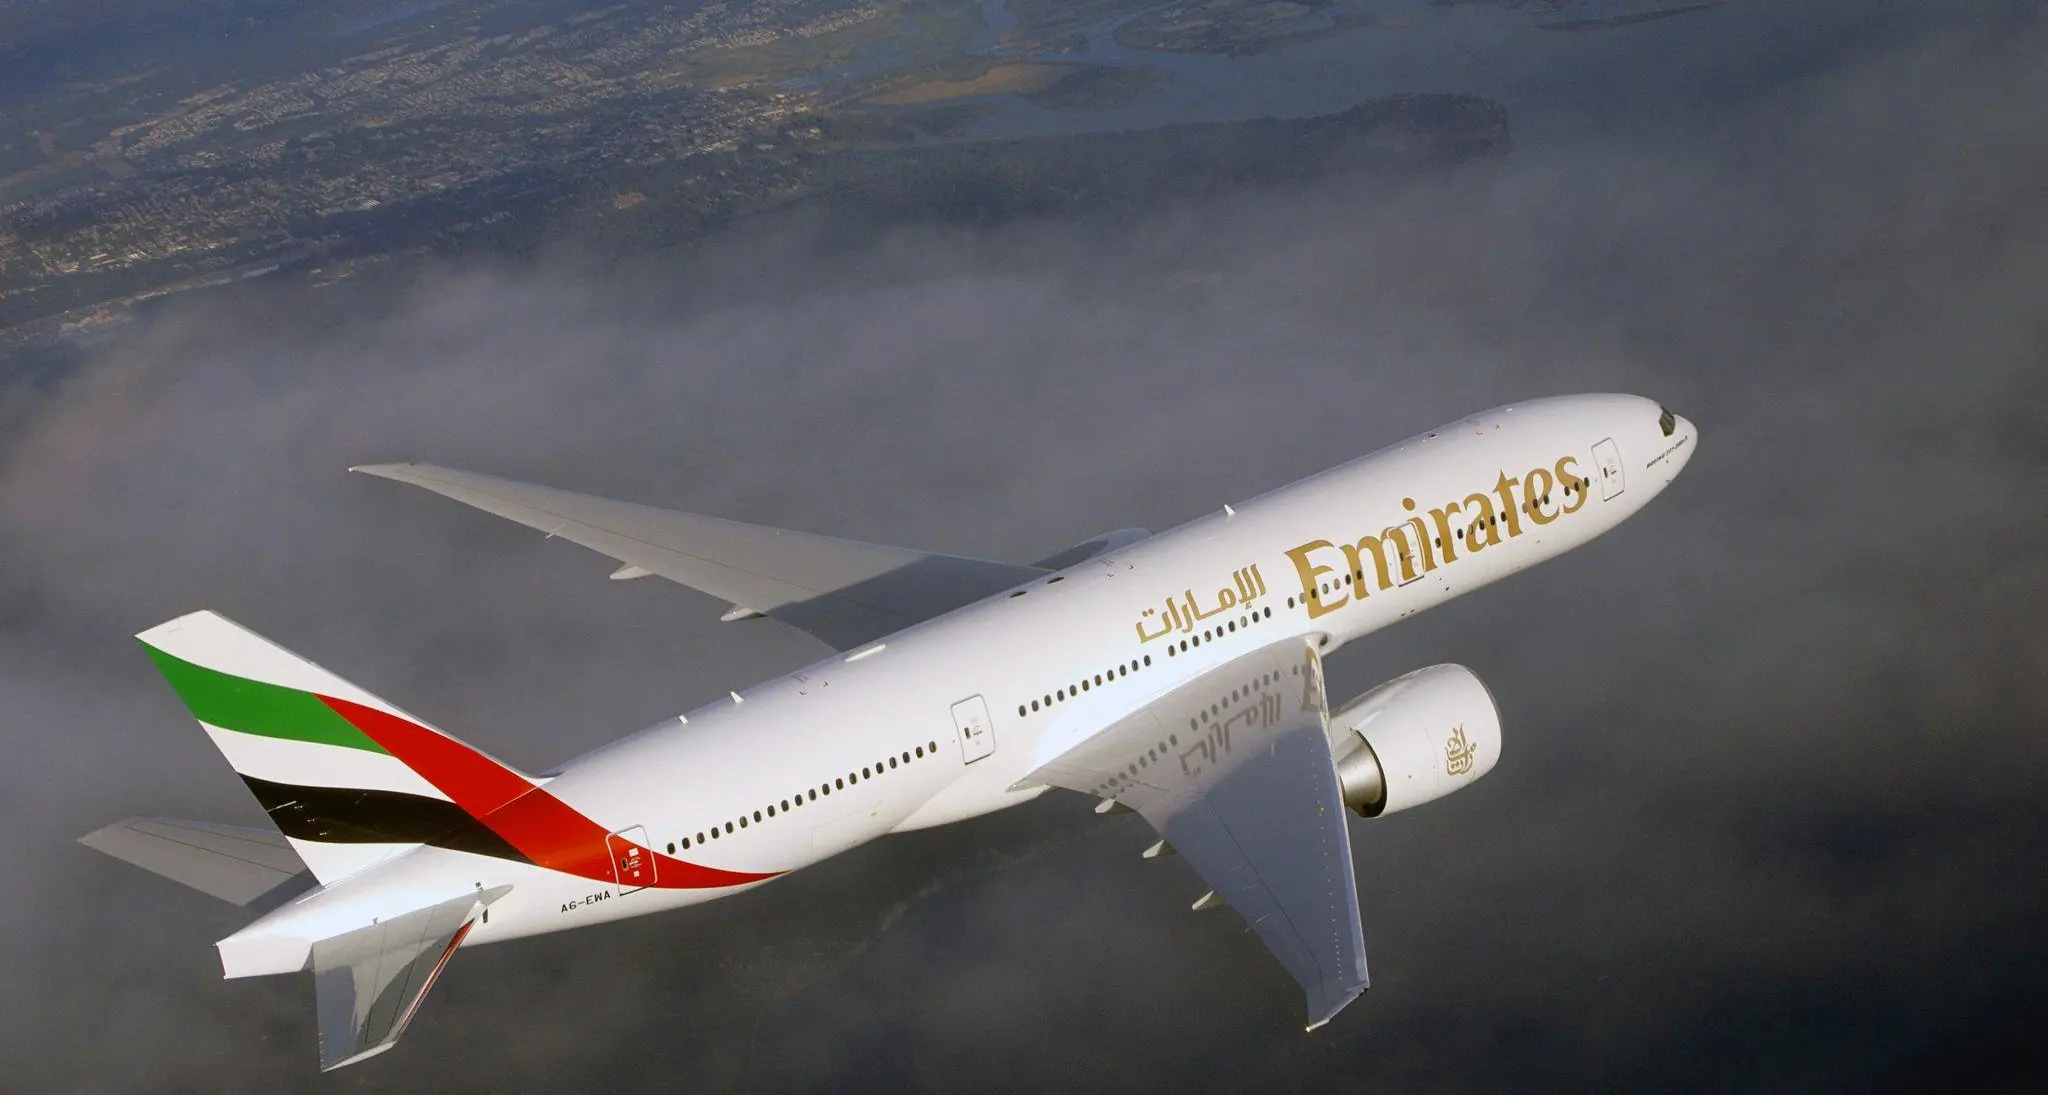 UAE flights: Emirates announces new daily service to this destination